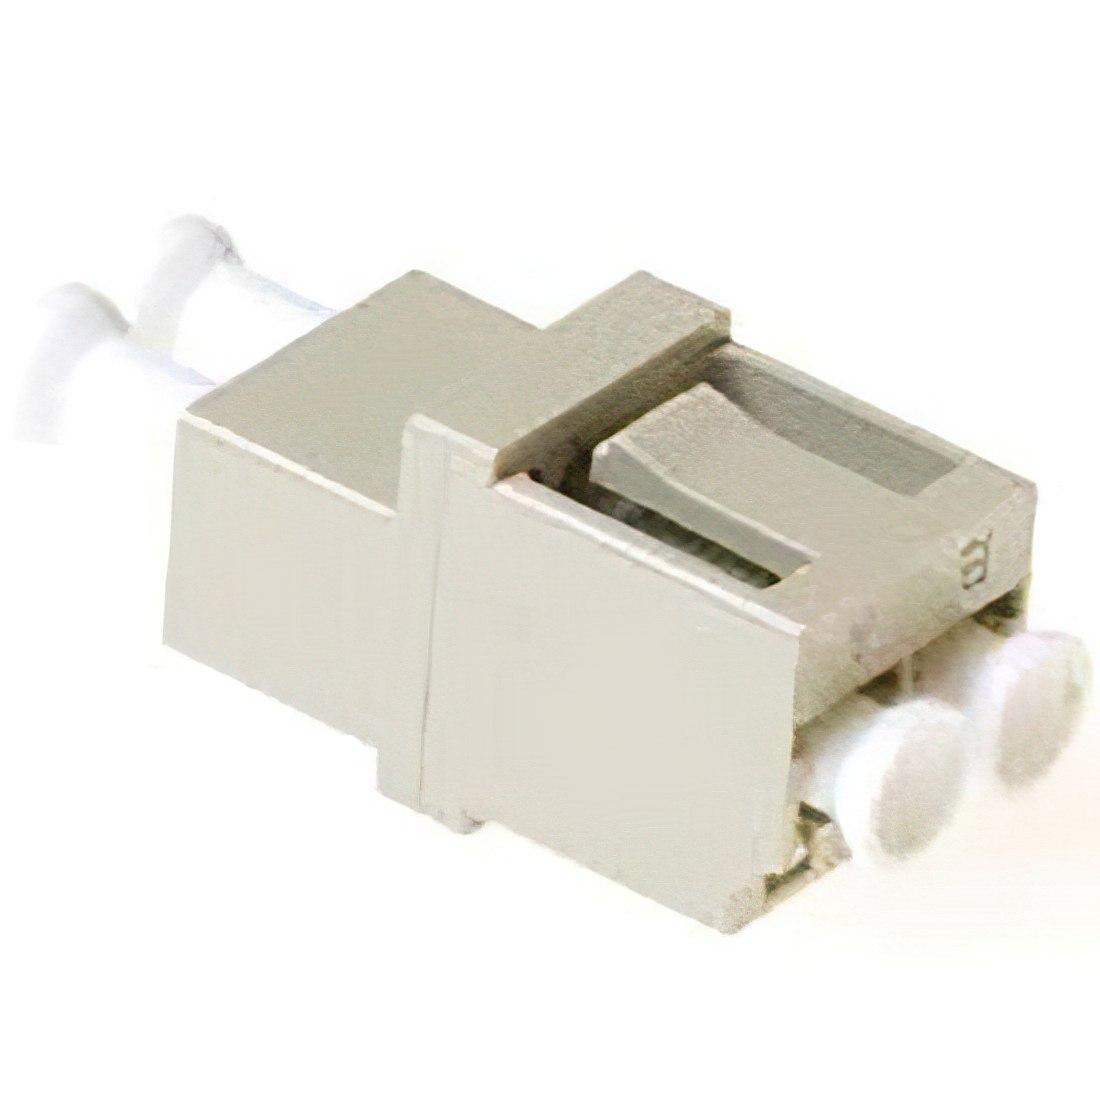 Image of Lc/lc duplex adapter - ACT